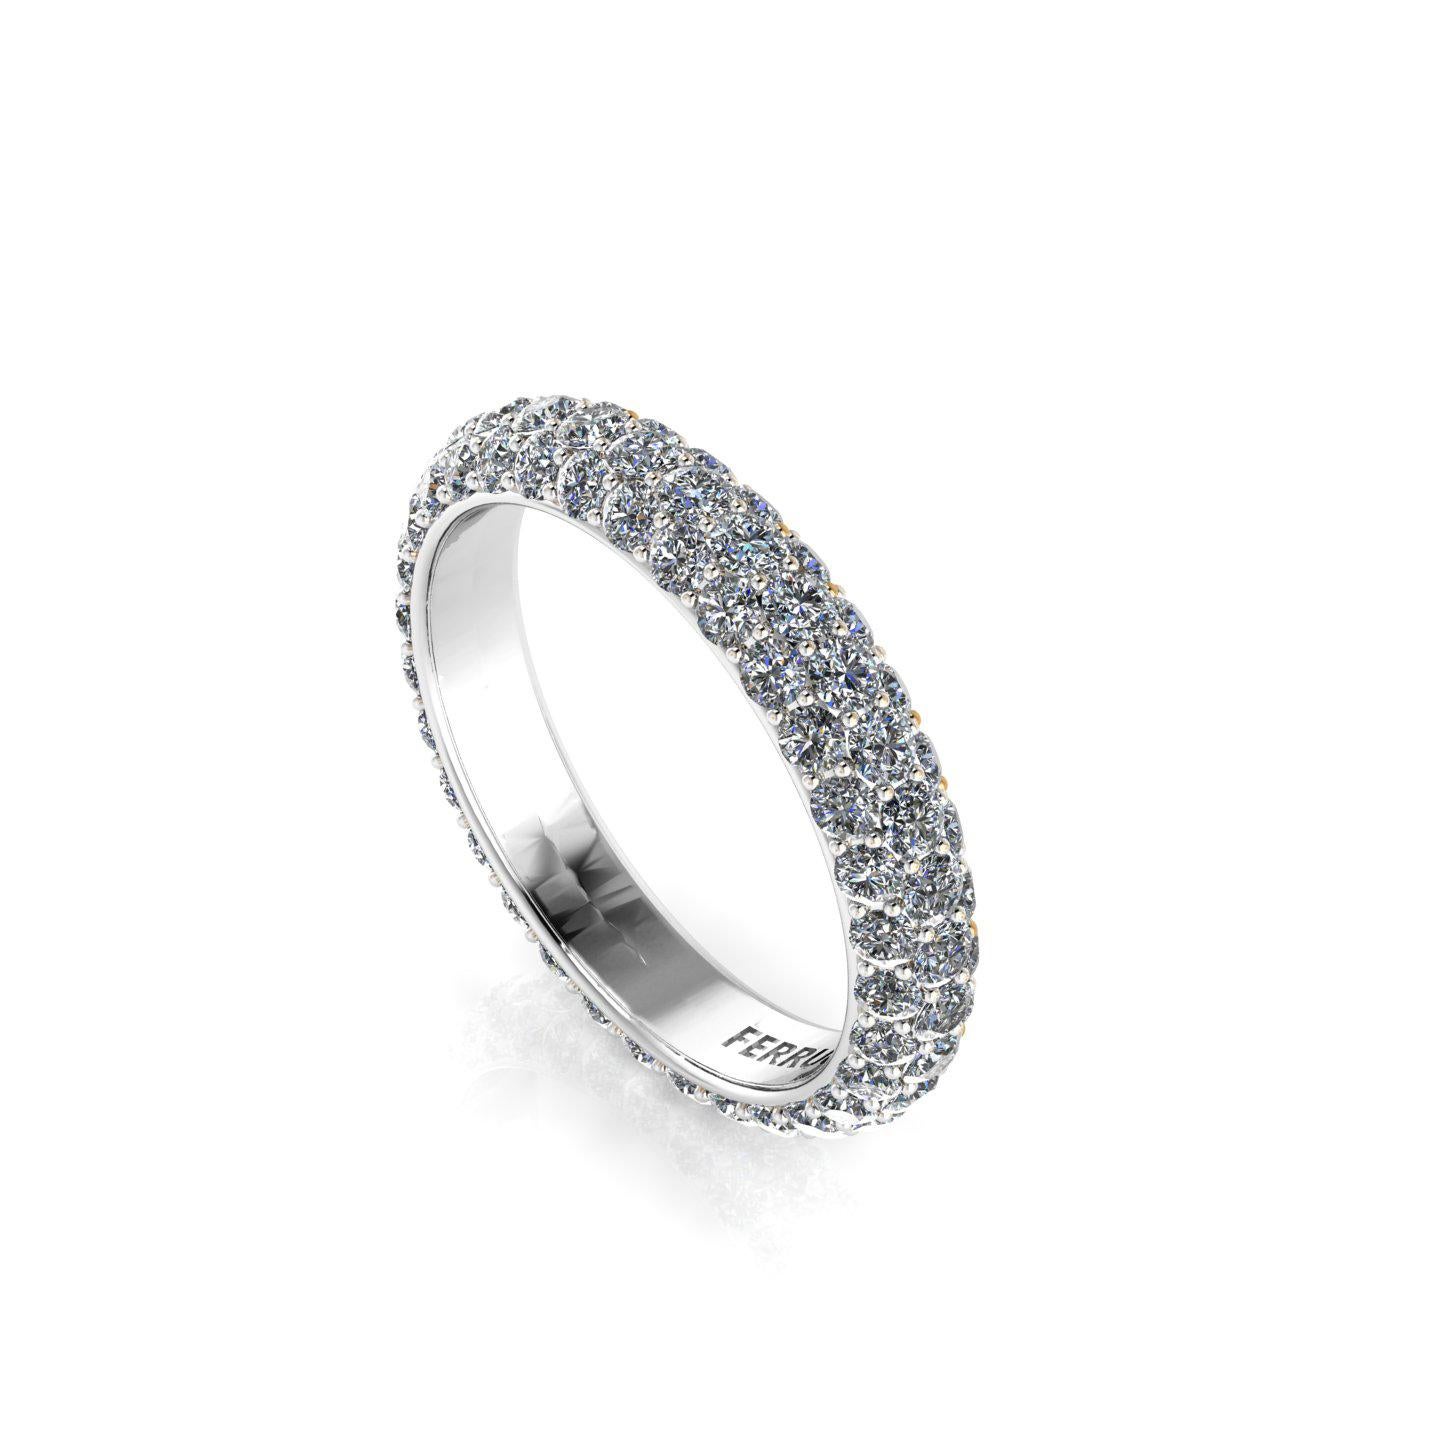 Triple Row Diamond pave' band, G color, VS clarity, for an approximate total carat weight of 2.00 carat, made in New York with the best Italian craftsmanship conceived in Platinum 950

This is a Ring size 6 we offer the complimentary option to